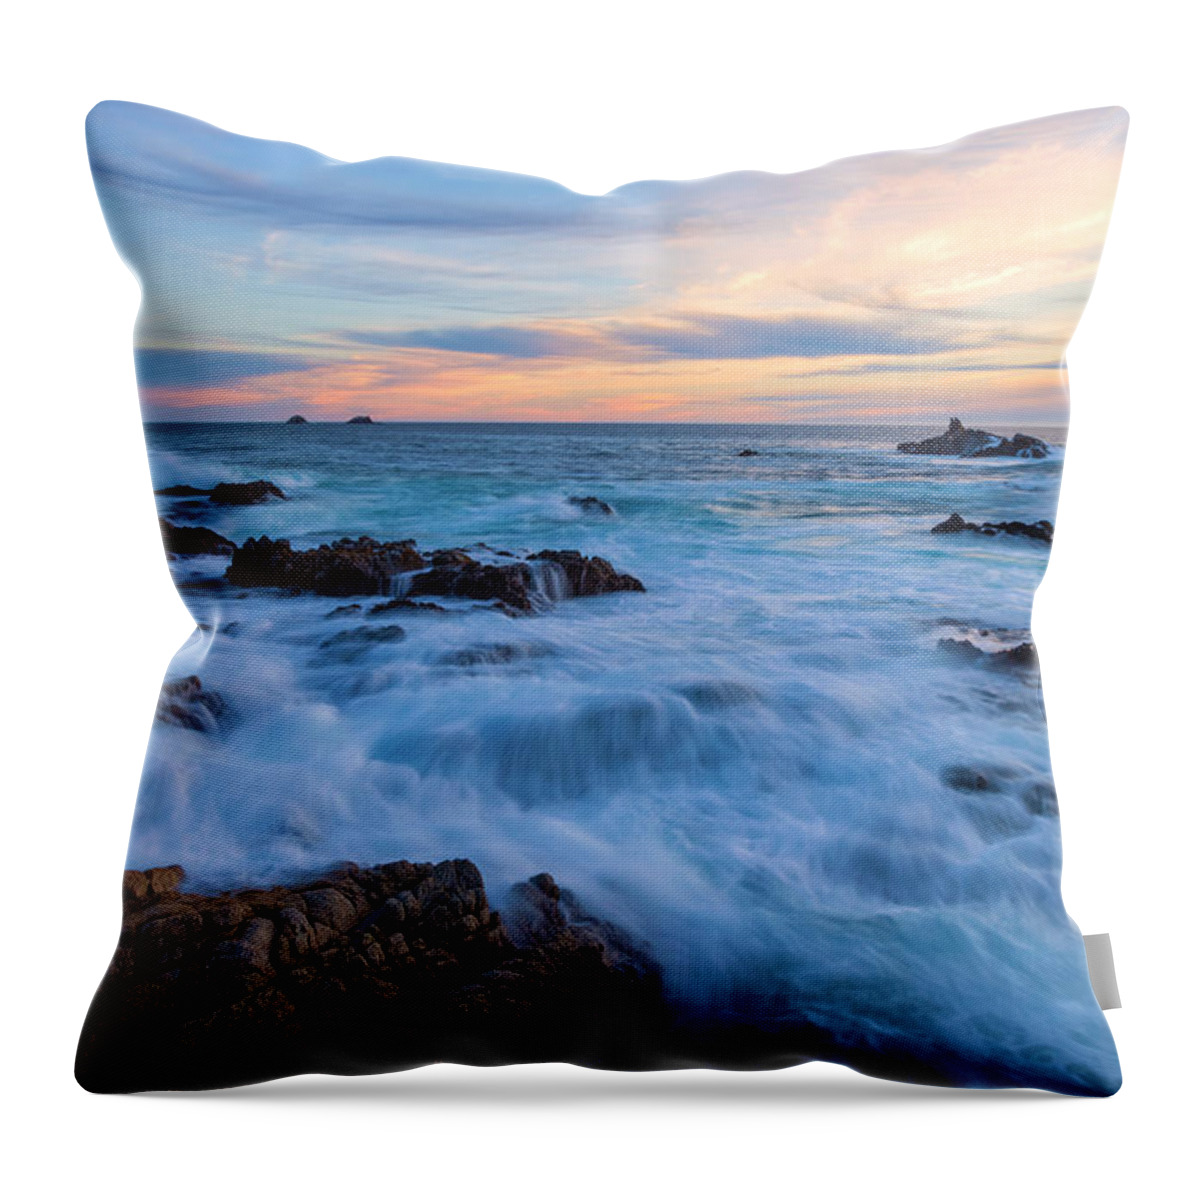 American Landscapes Throw Pillow featuring the photograph Incoming Waves by Jonathan Nguyen